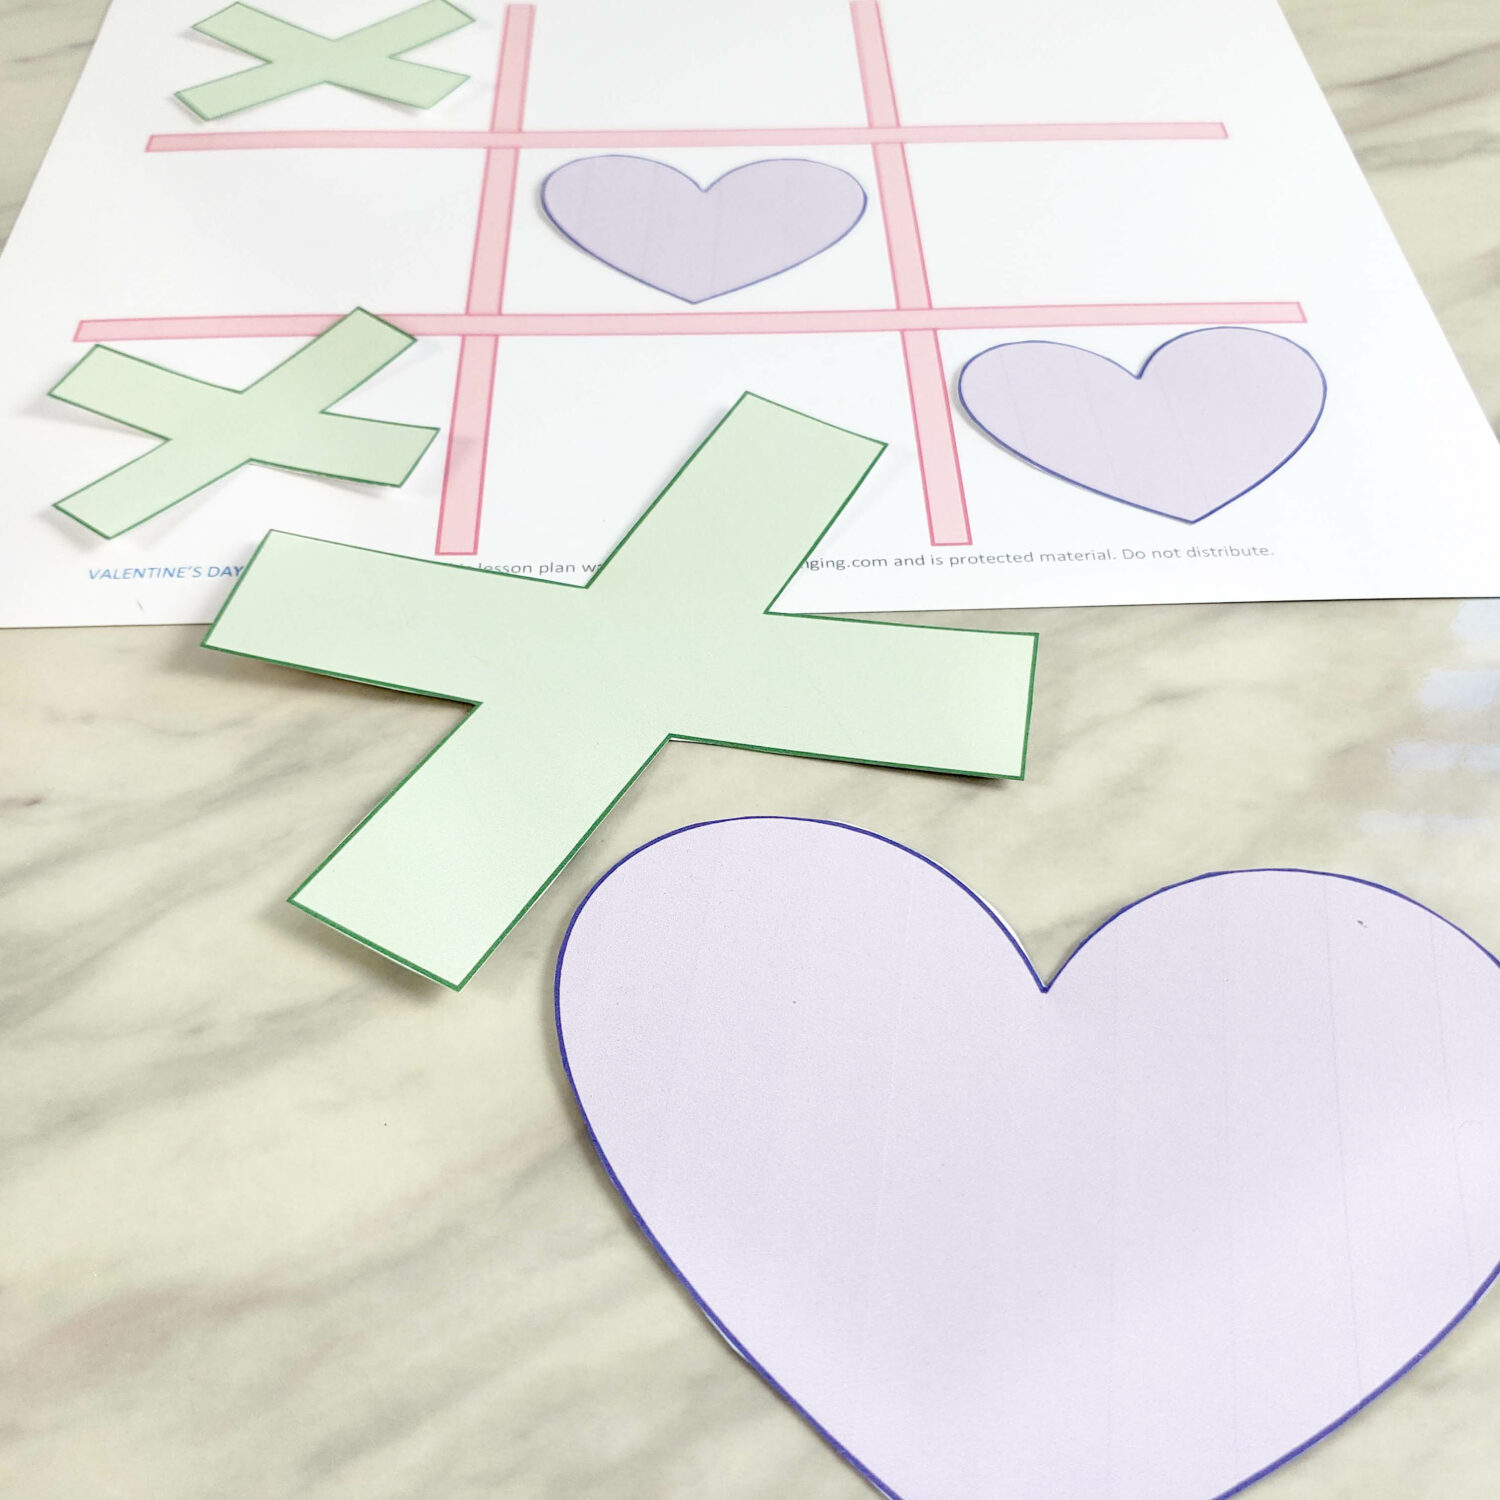 Valentine's Day Tic Tac Toe printable game and singing time activity